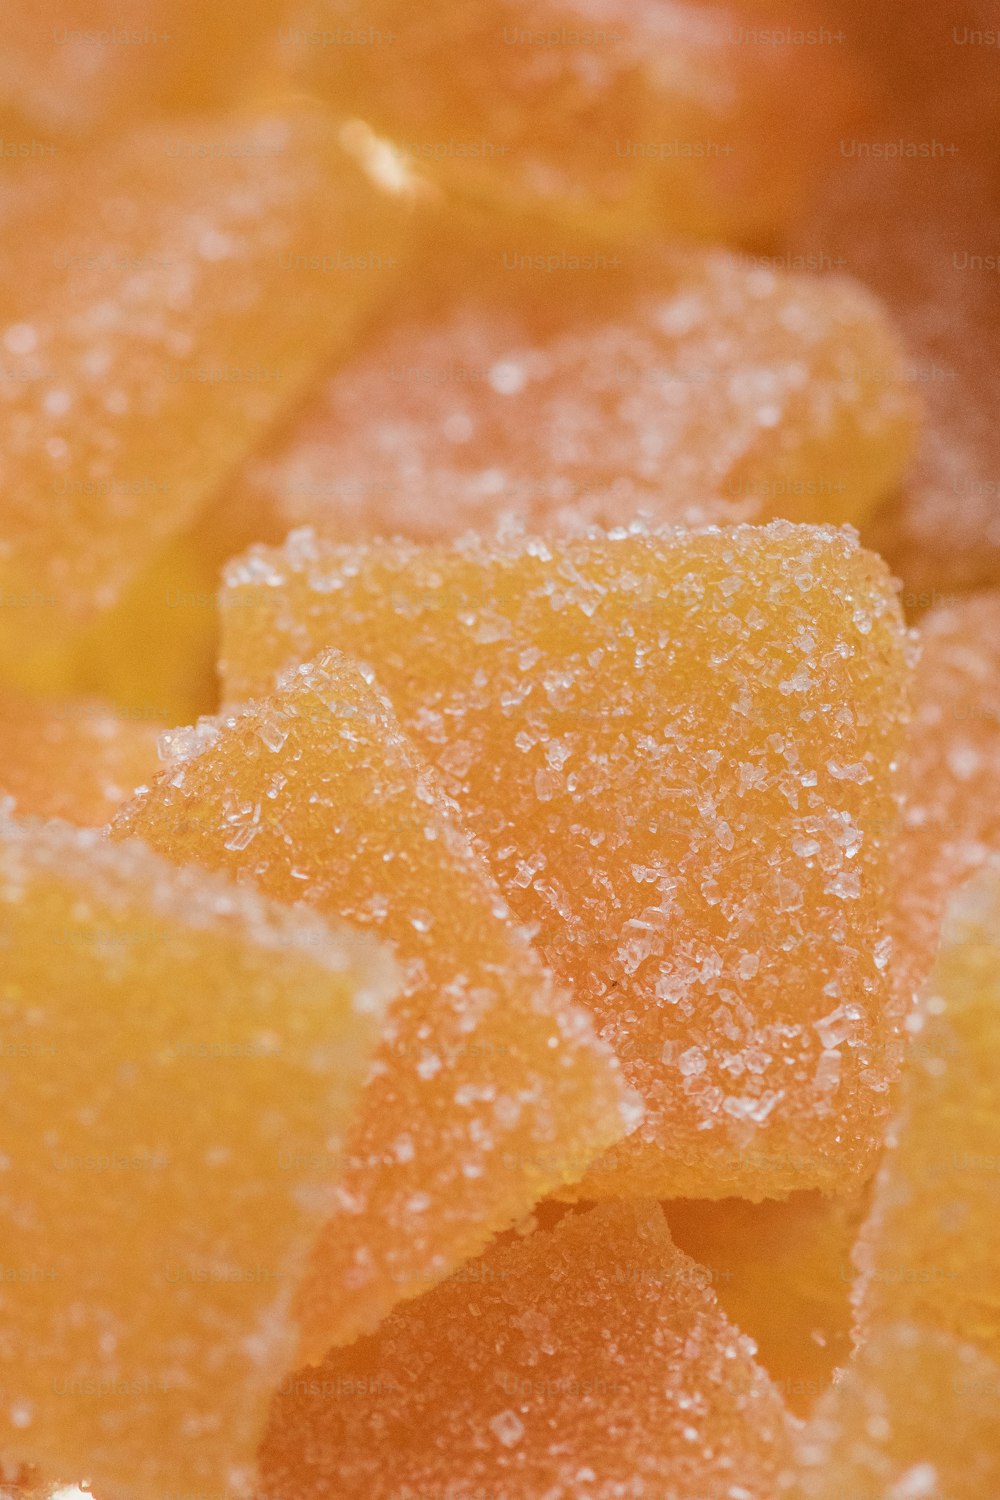 a close up of a pile of sugary candies